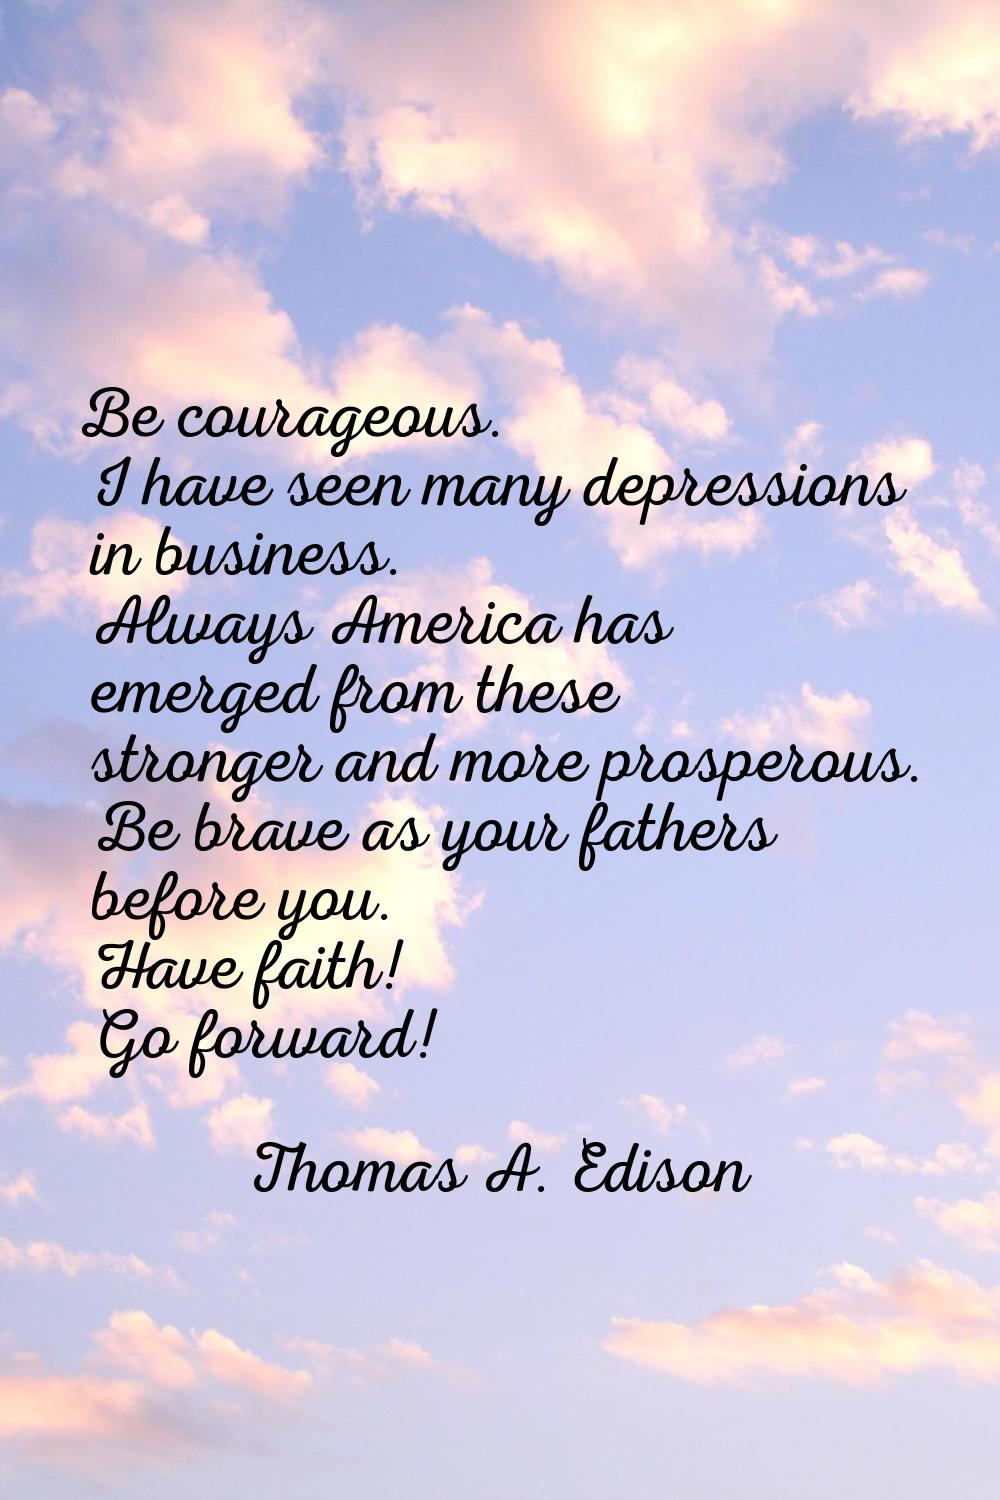 Be courageous. I have seen many depressions in business. Always America has emerged from these stro